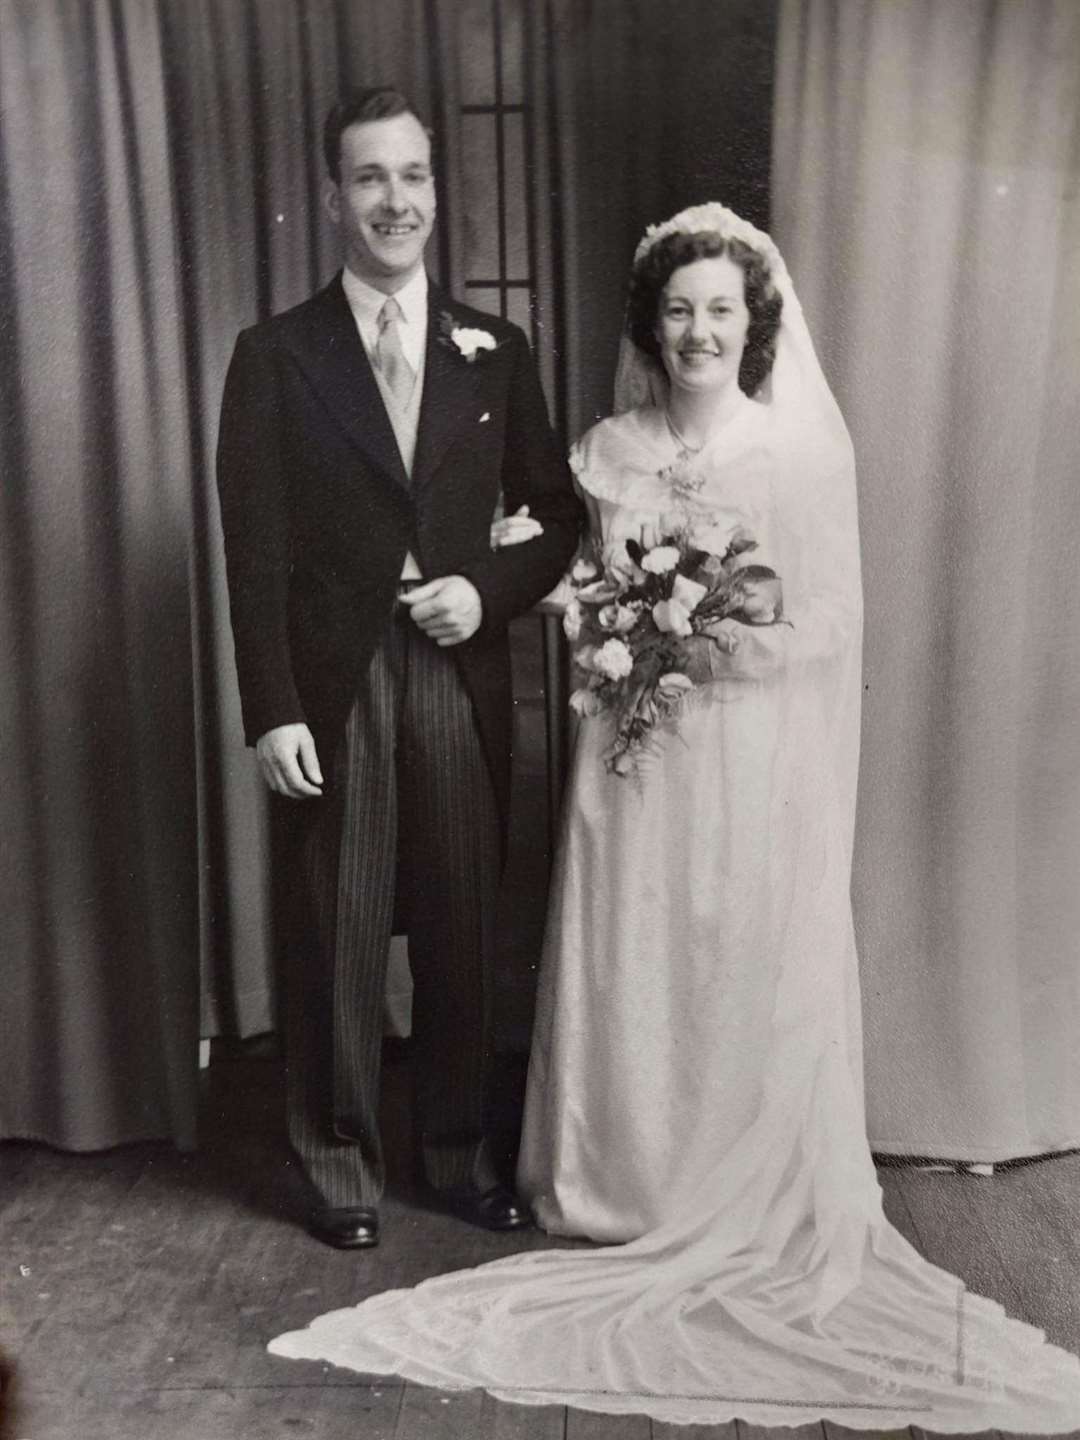 Betty and her husband Frank in 1950.